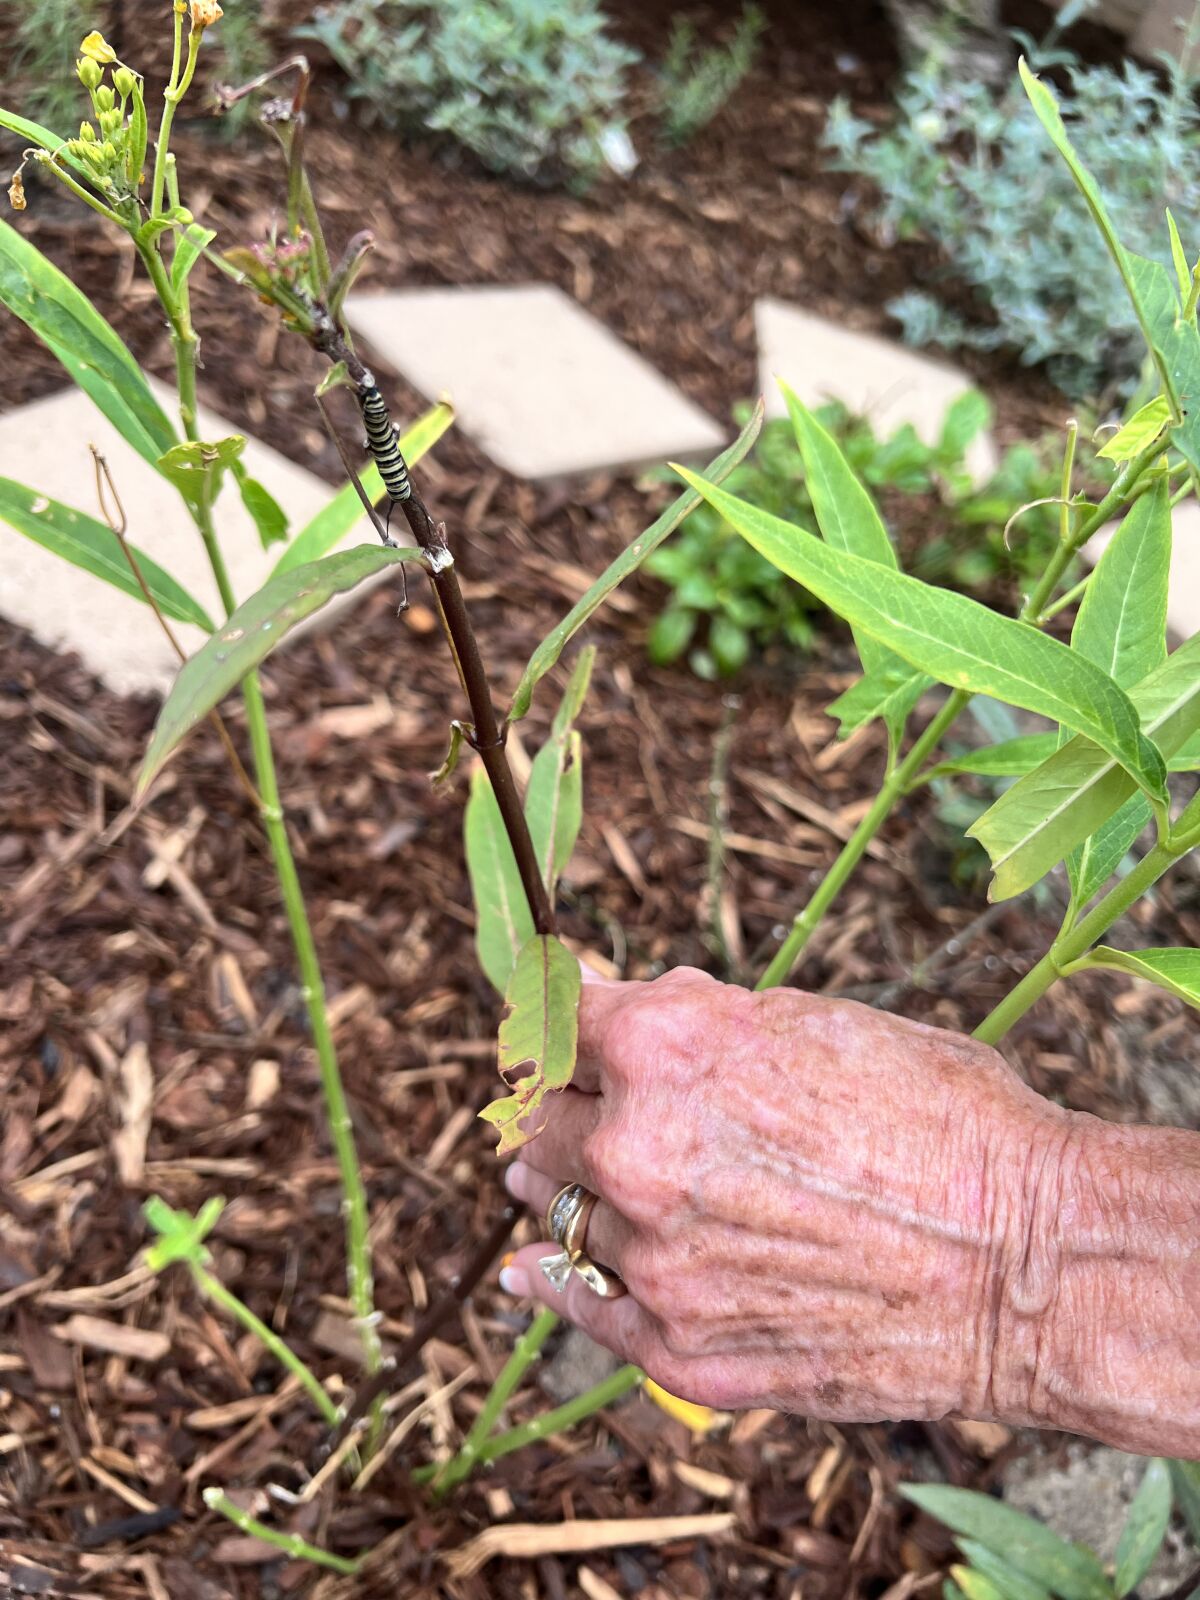 Carol Studebaker collects striped caterpillars, like the one on the plant above her hand, daily for protection in cages.